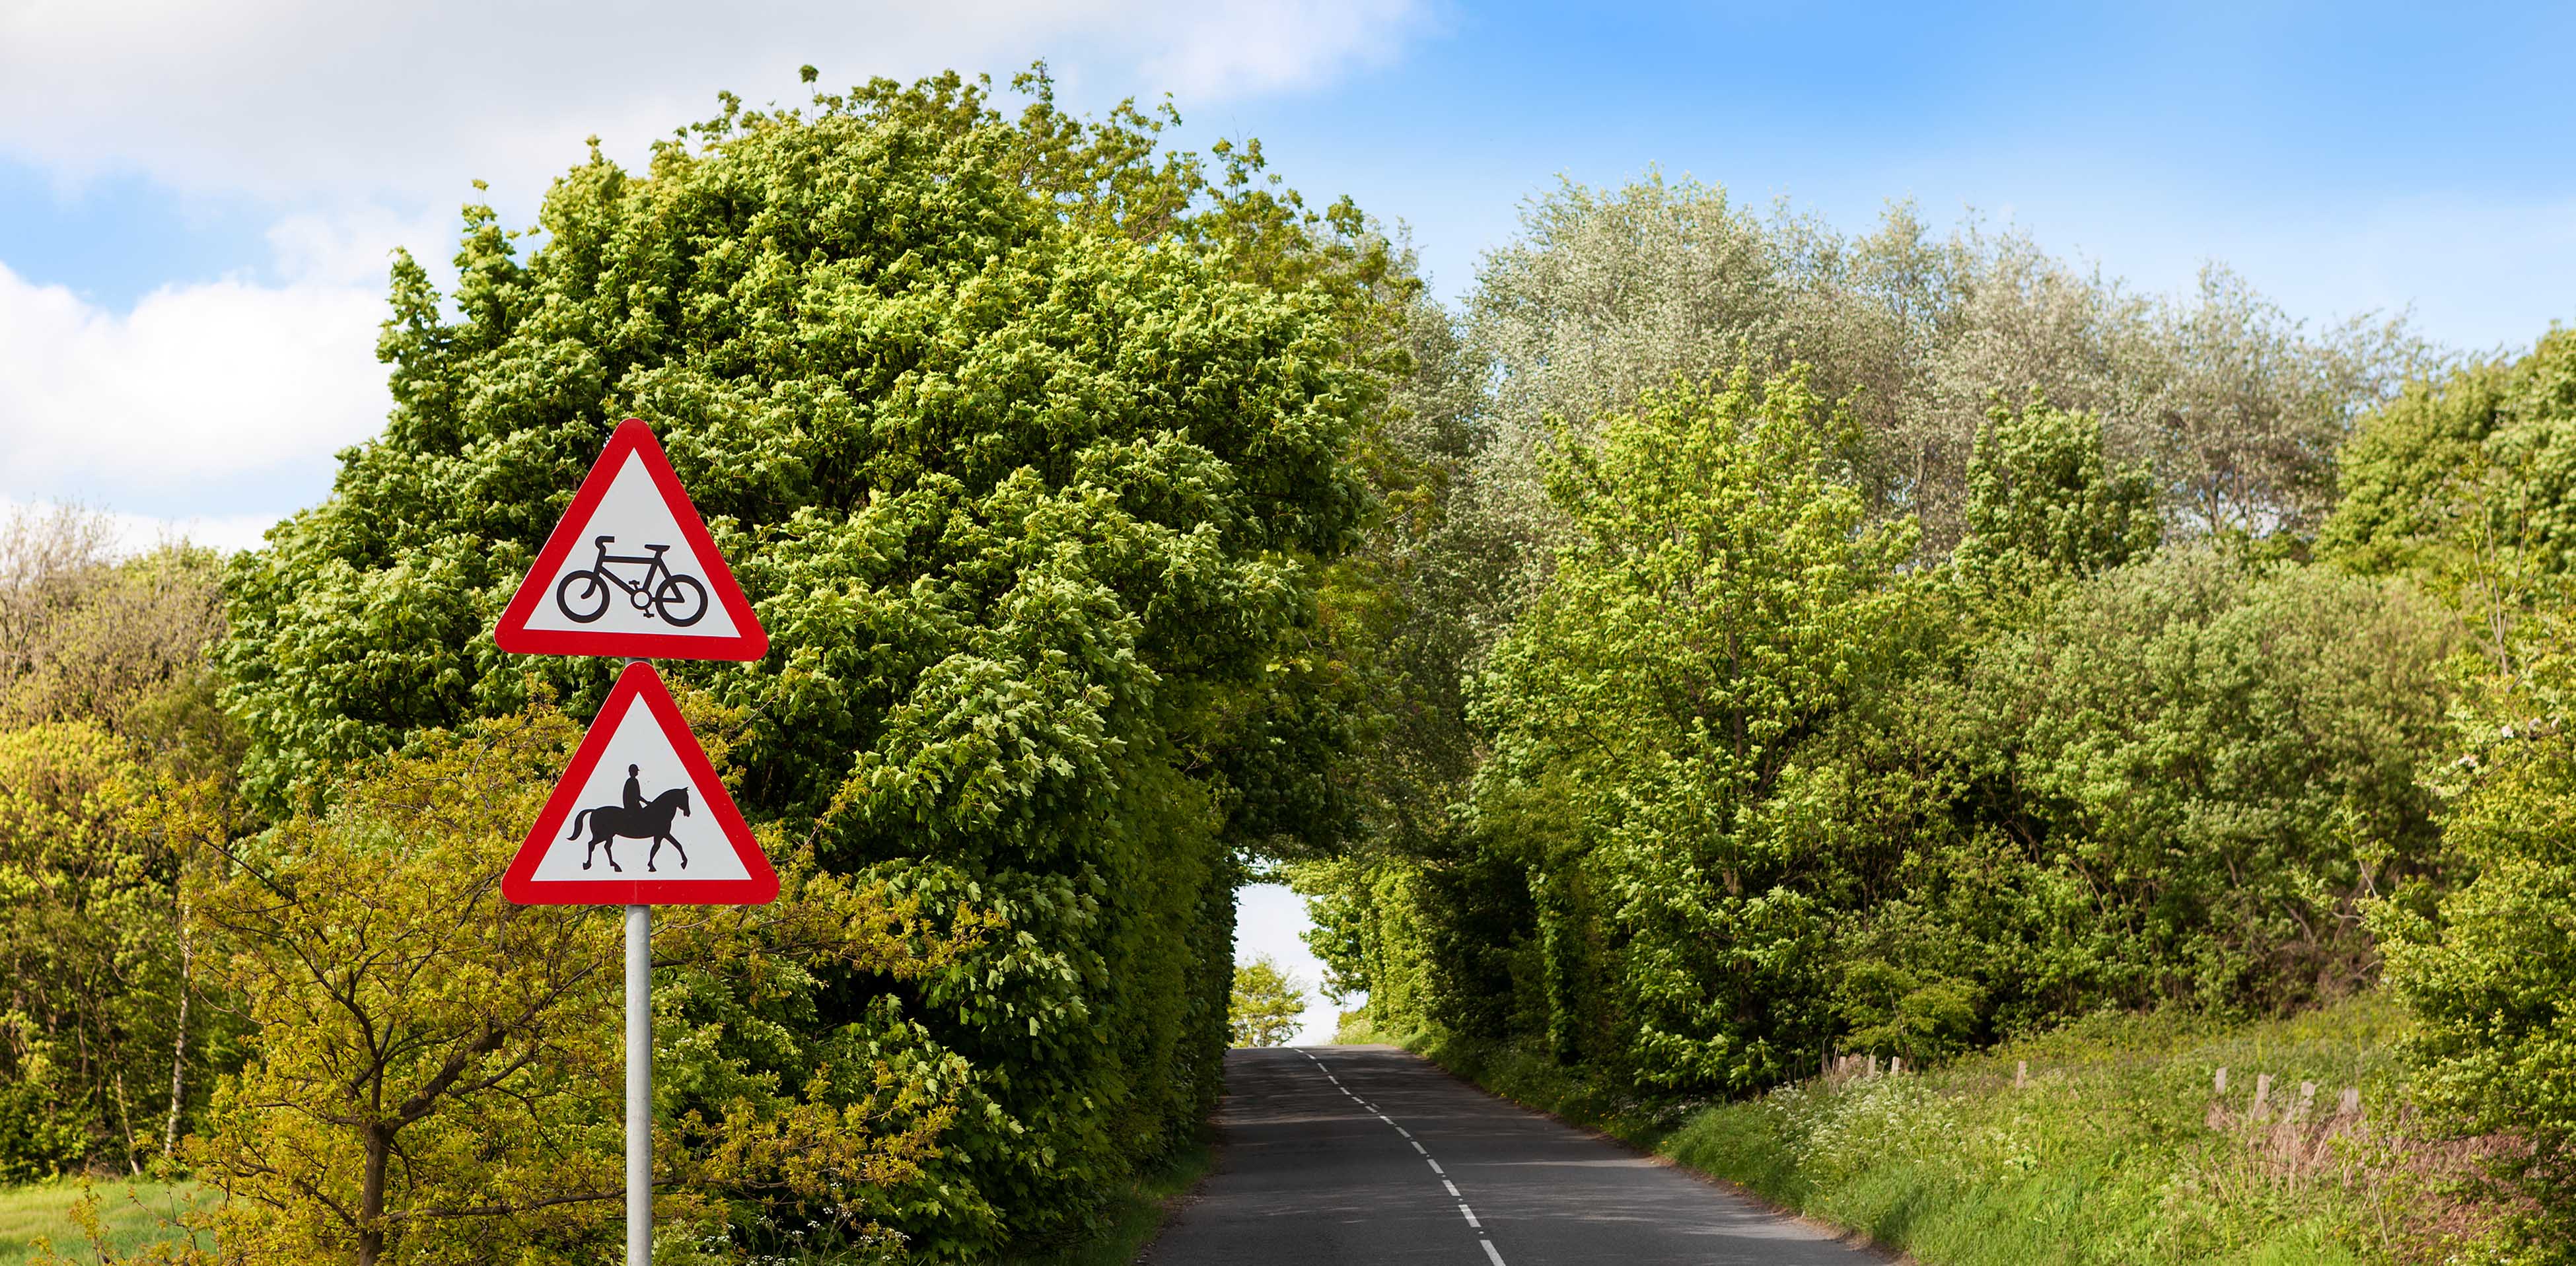 How to drive safely on country lanes - Ageas